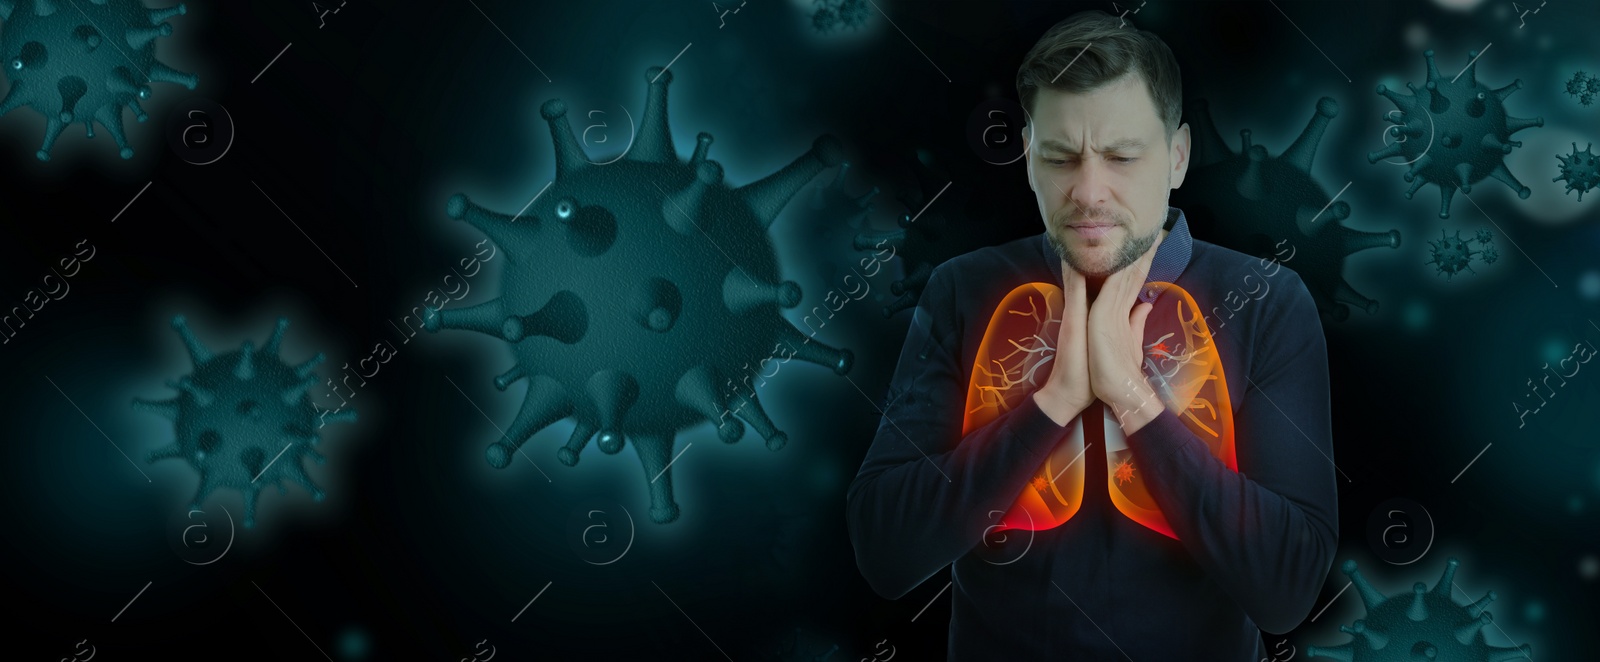 Image of Man with diseased lungs and viruses around him on dark background